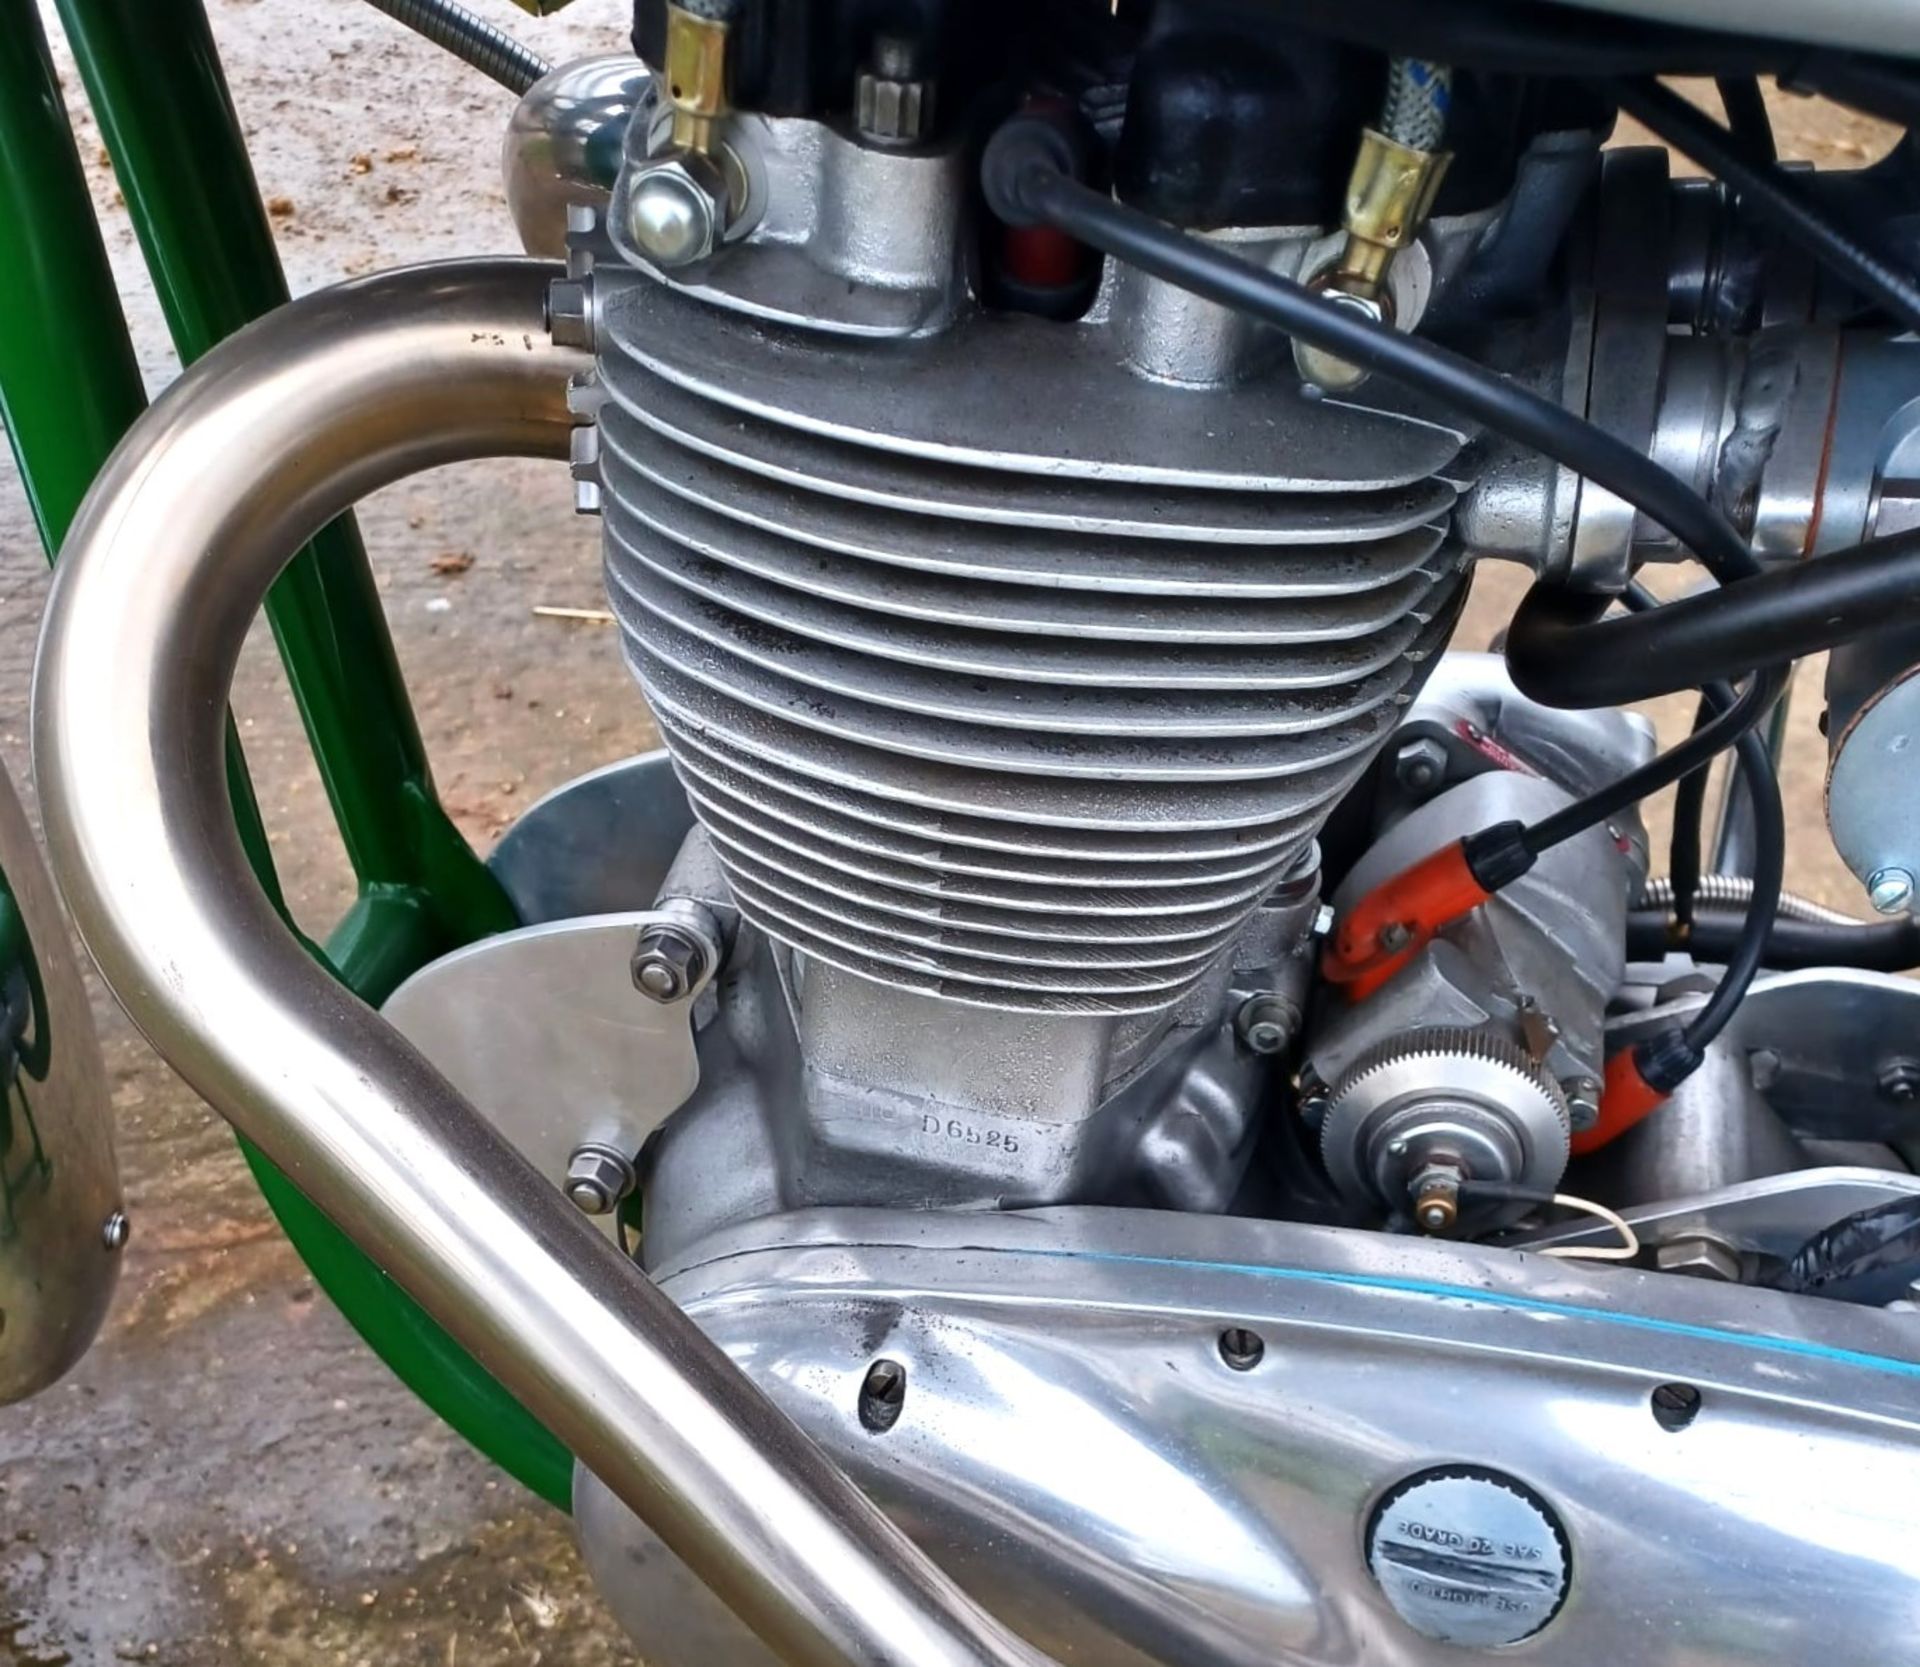 1958 TRITON 650cc Registration Number: 482 XVW Frame Number: TBA Recorded Mileage: 14 miles - - Image 9 of 16